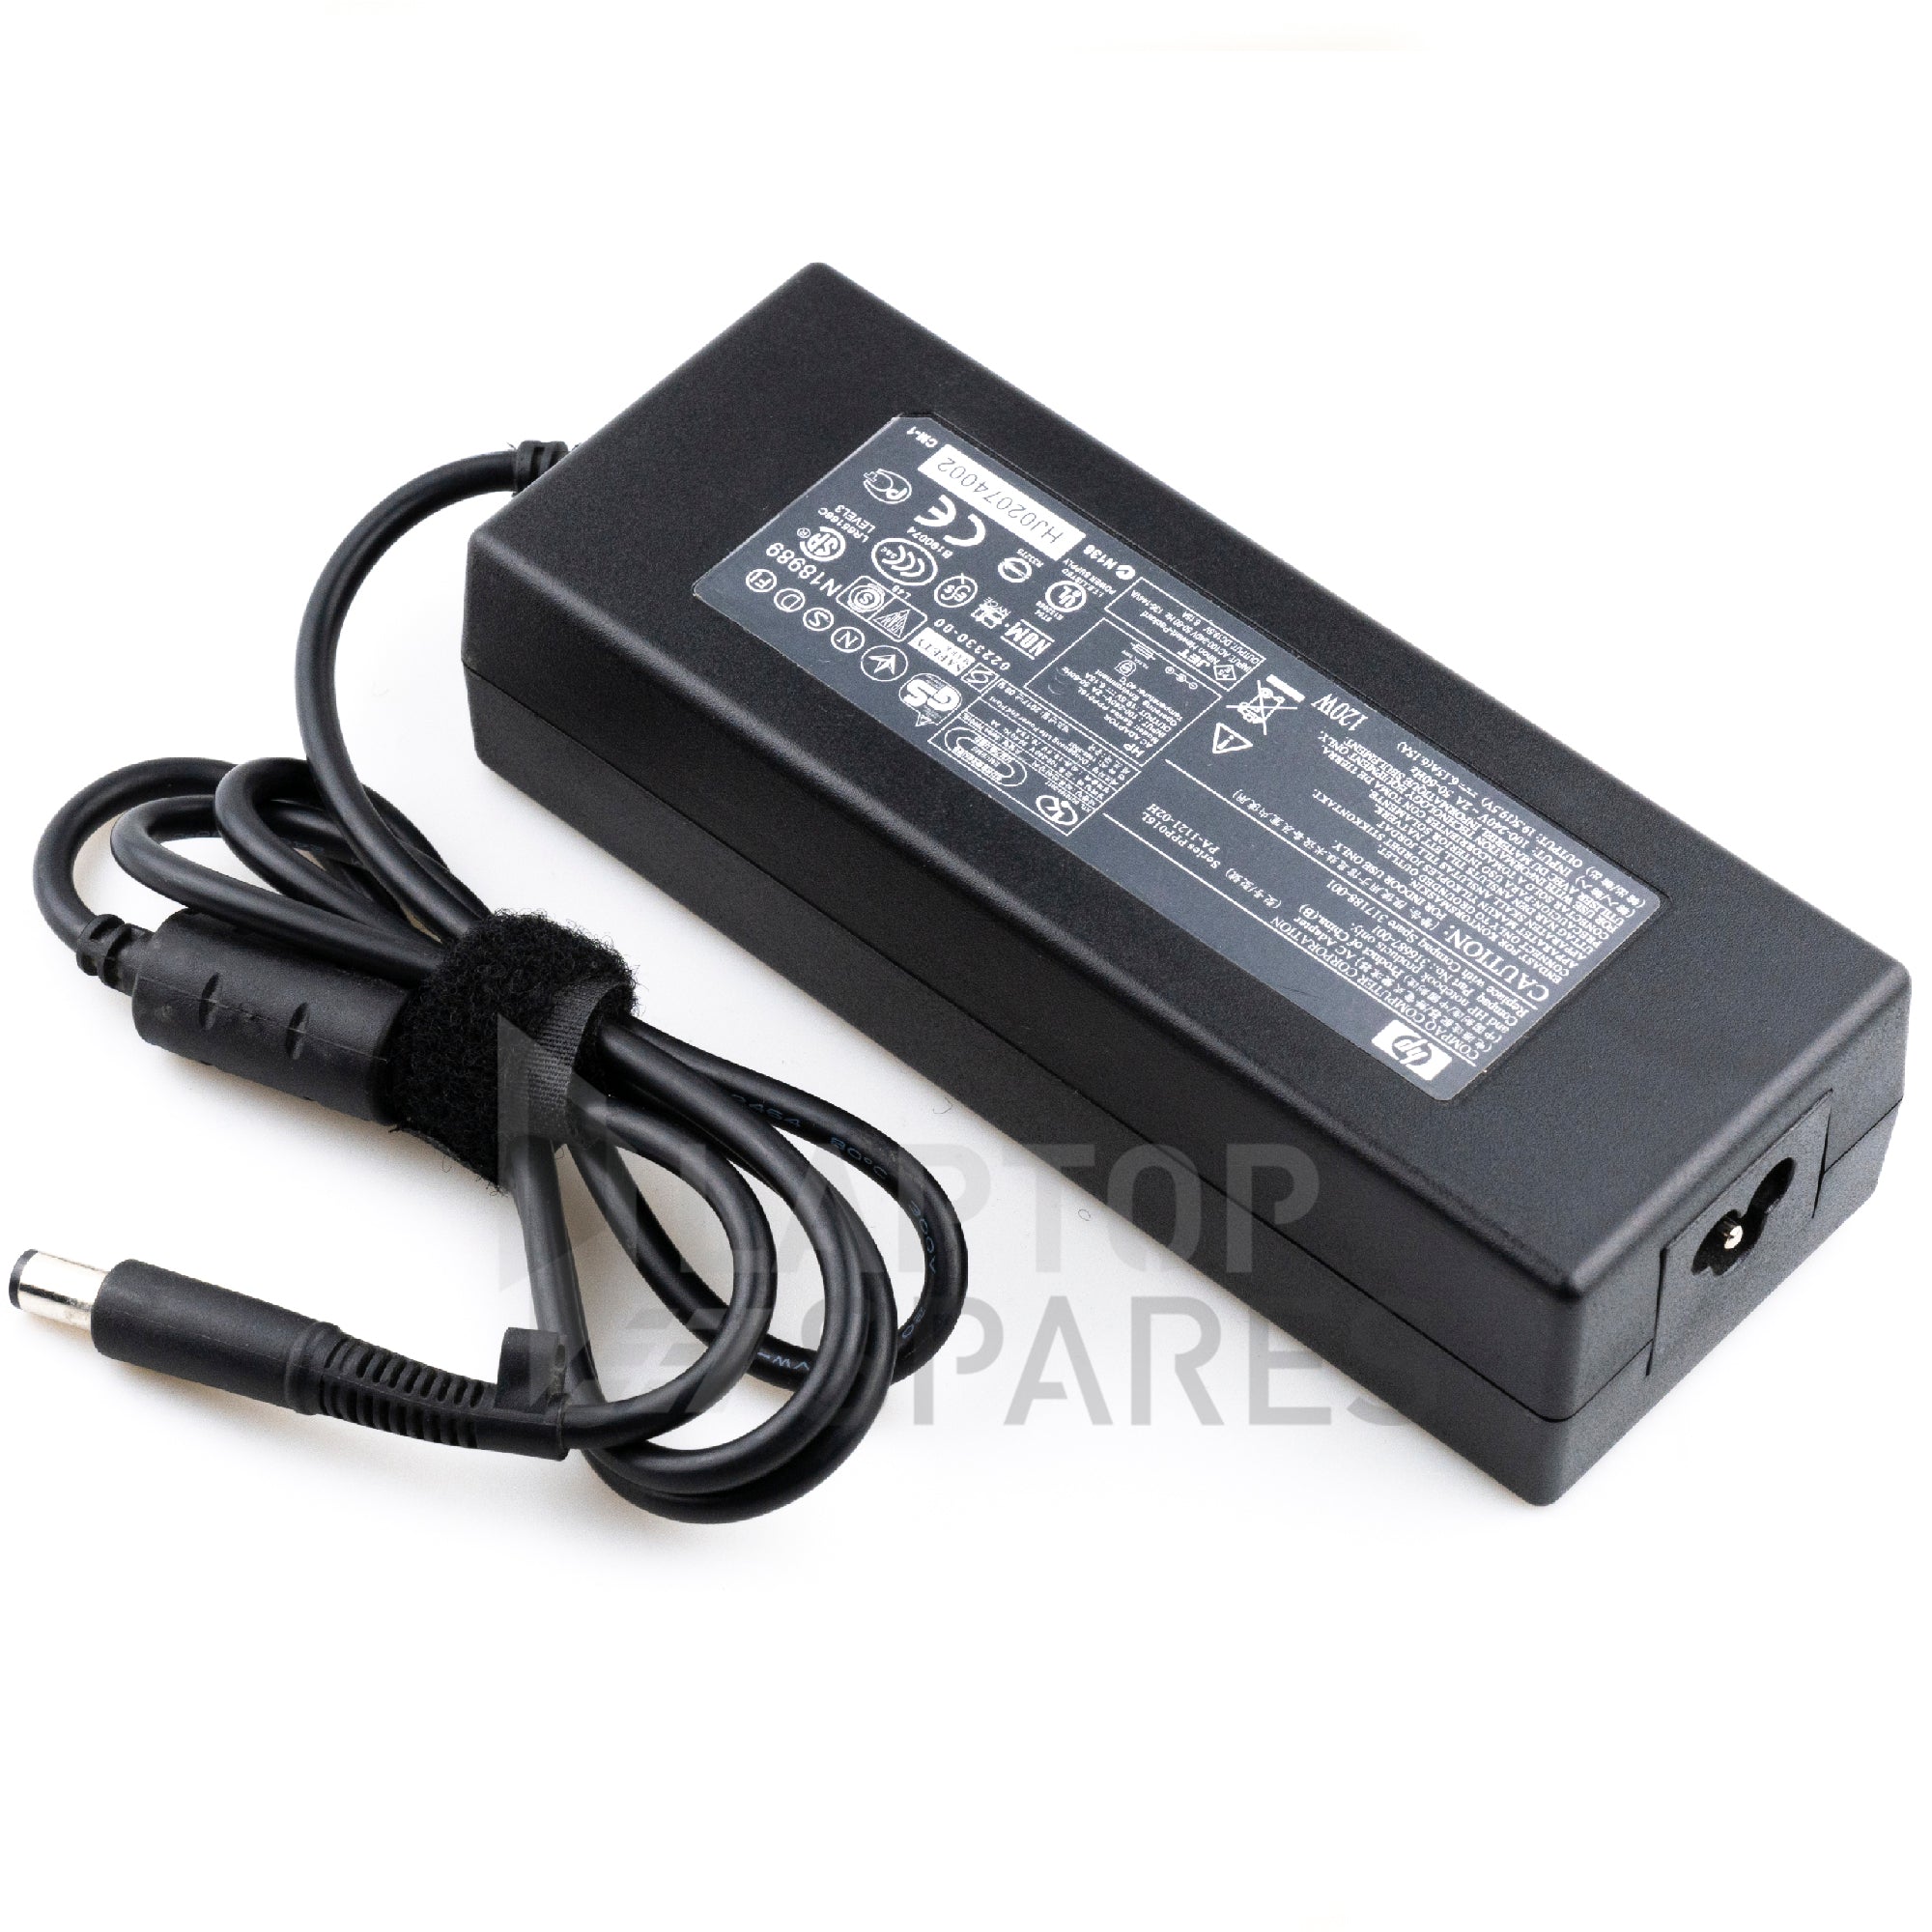 Chargeur PC Portable HP PPP009S - HP